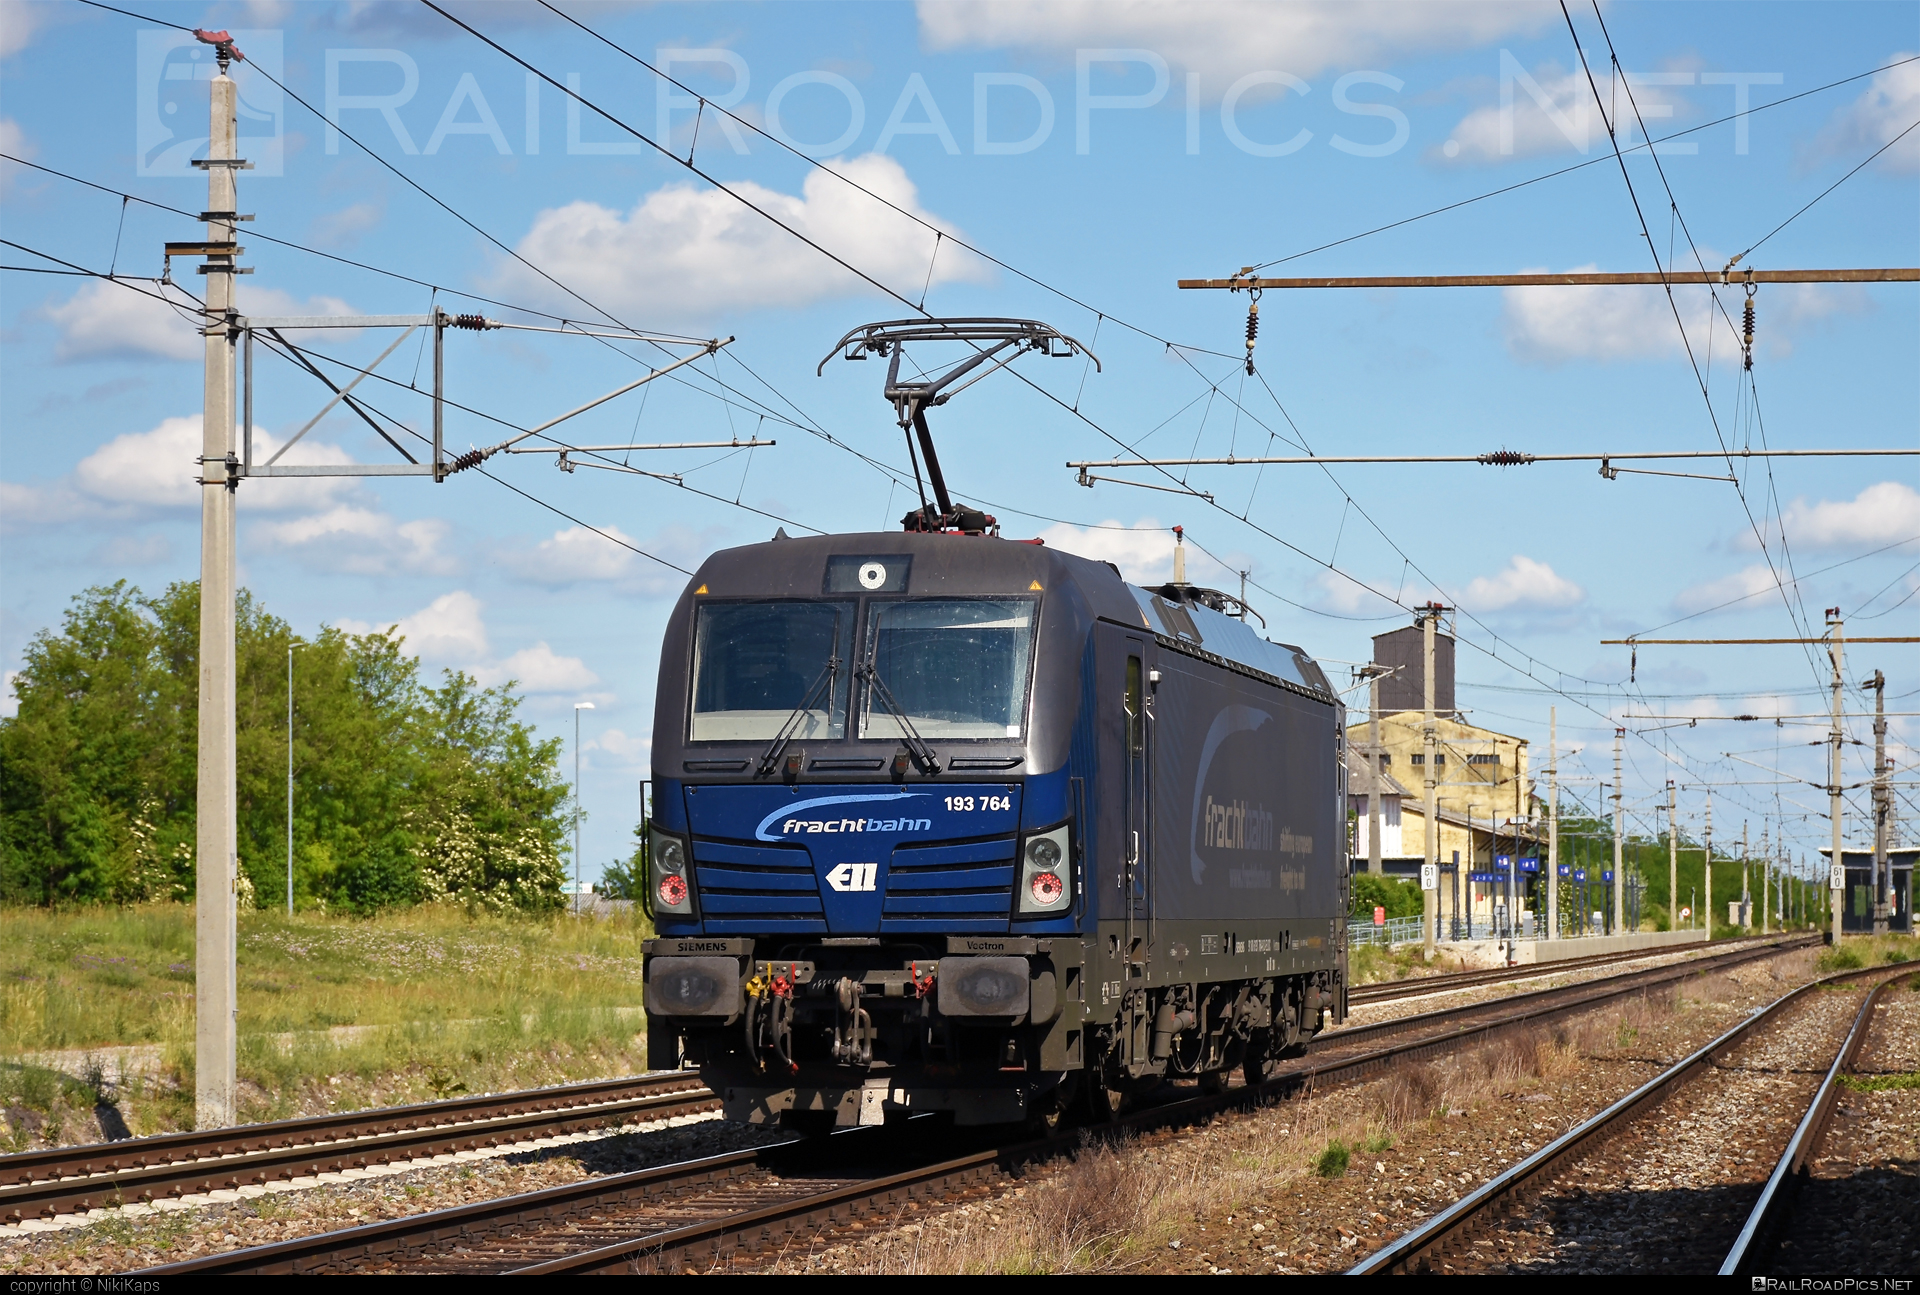 Siemens Vectron MS - 193 764 operated by FRACHTbahn Traktion GmbH #ell #ellgermany #eloc #europeanlocomotiveleasing #frachtbahn #frachtbahntraktion #frachtbahntraktiongmbh #siemens #siemensvectron #siemensvectronms #vectron #vectronms